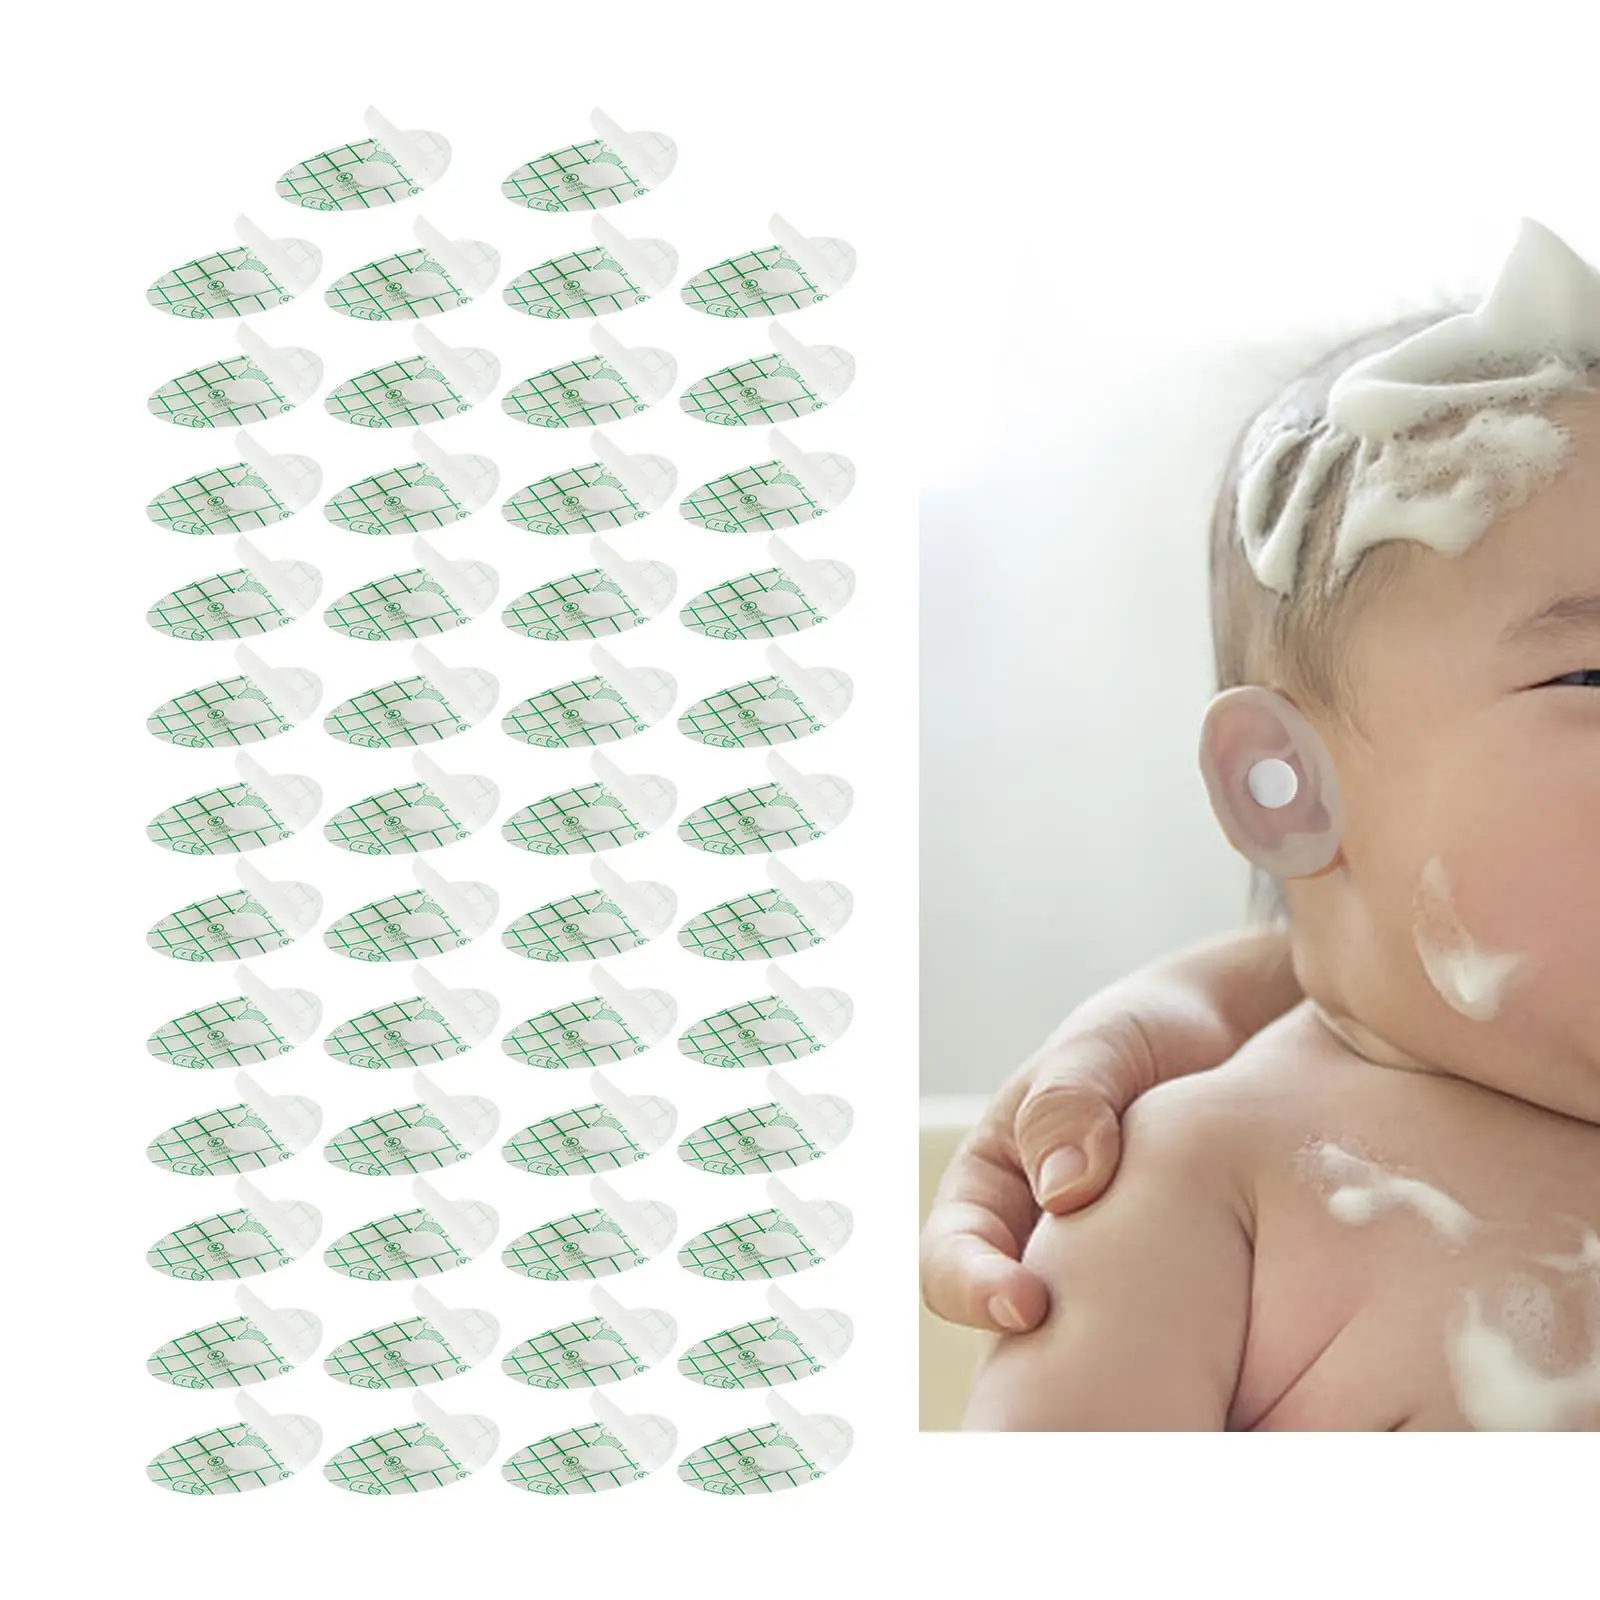 

50x Waterproof Baby Ear Stickers Earmuffs ears Protector Covers for Water Sports